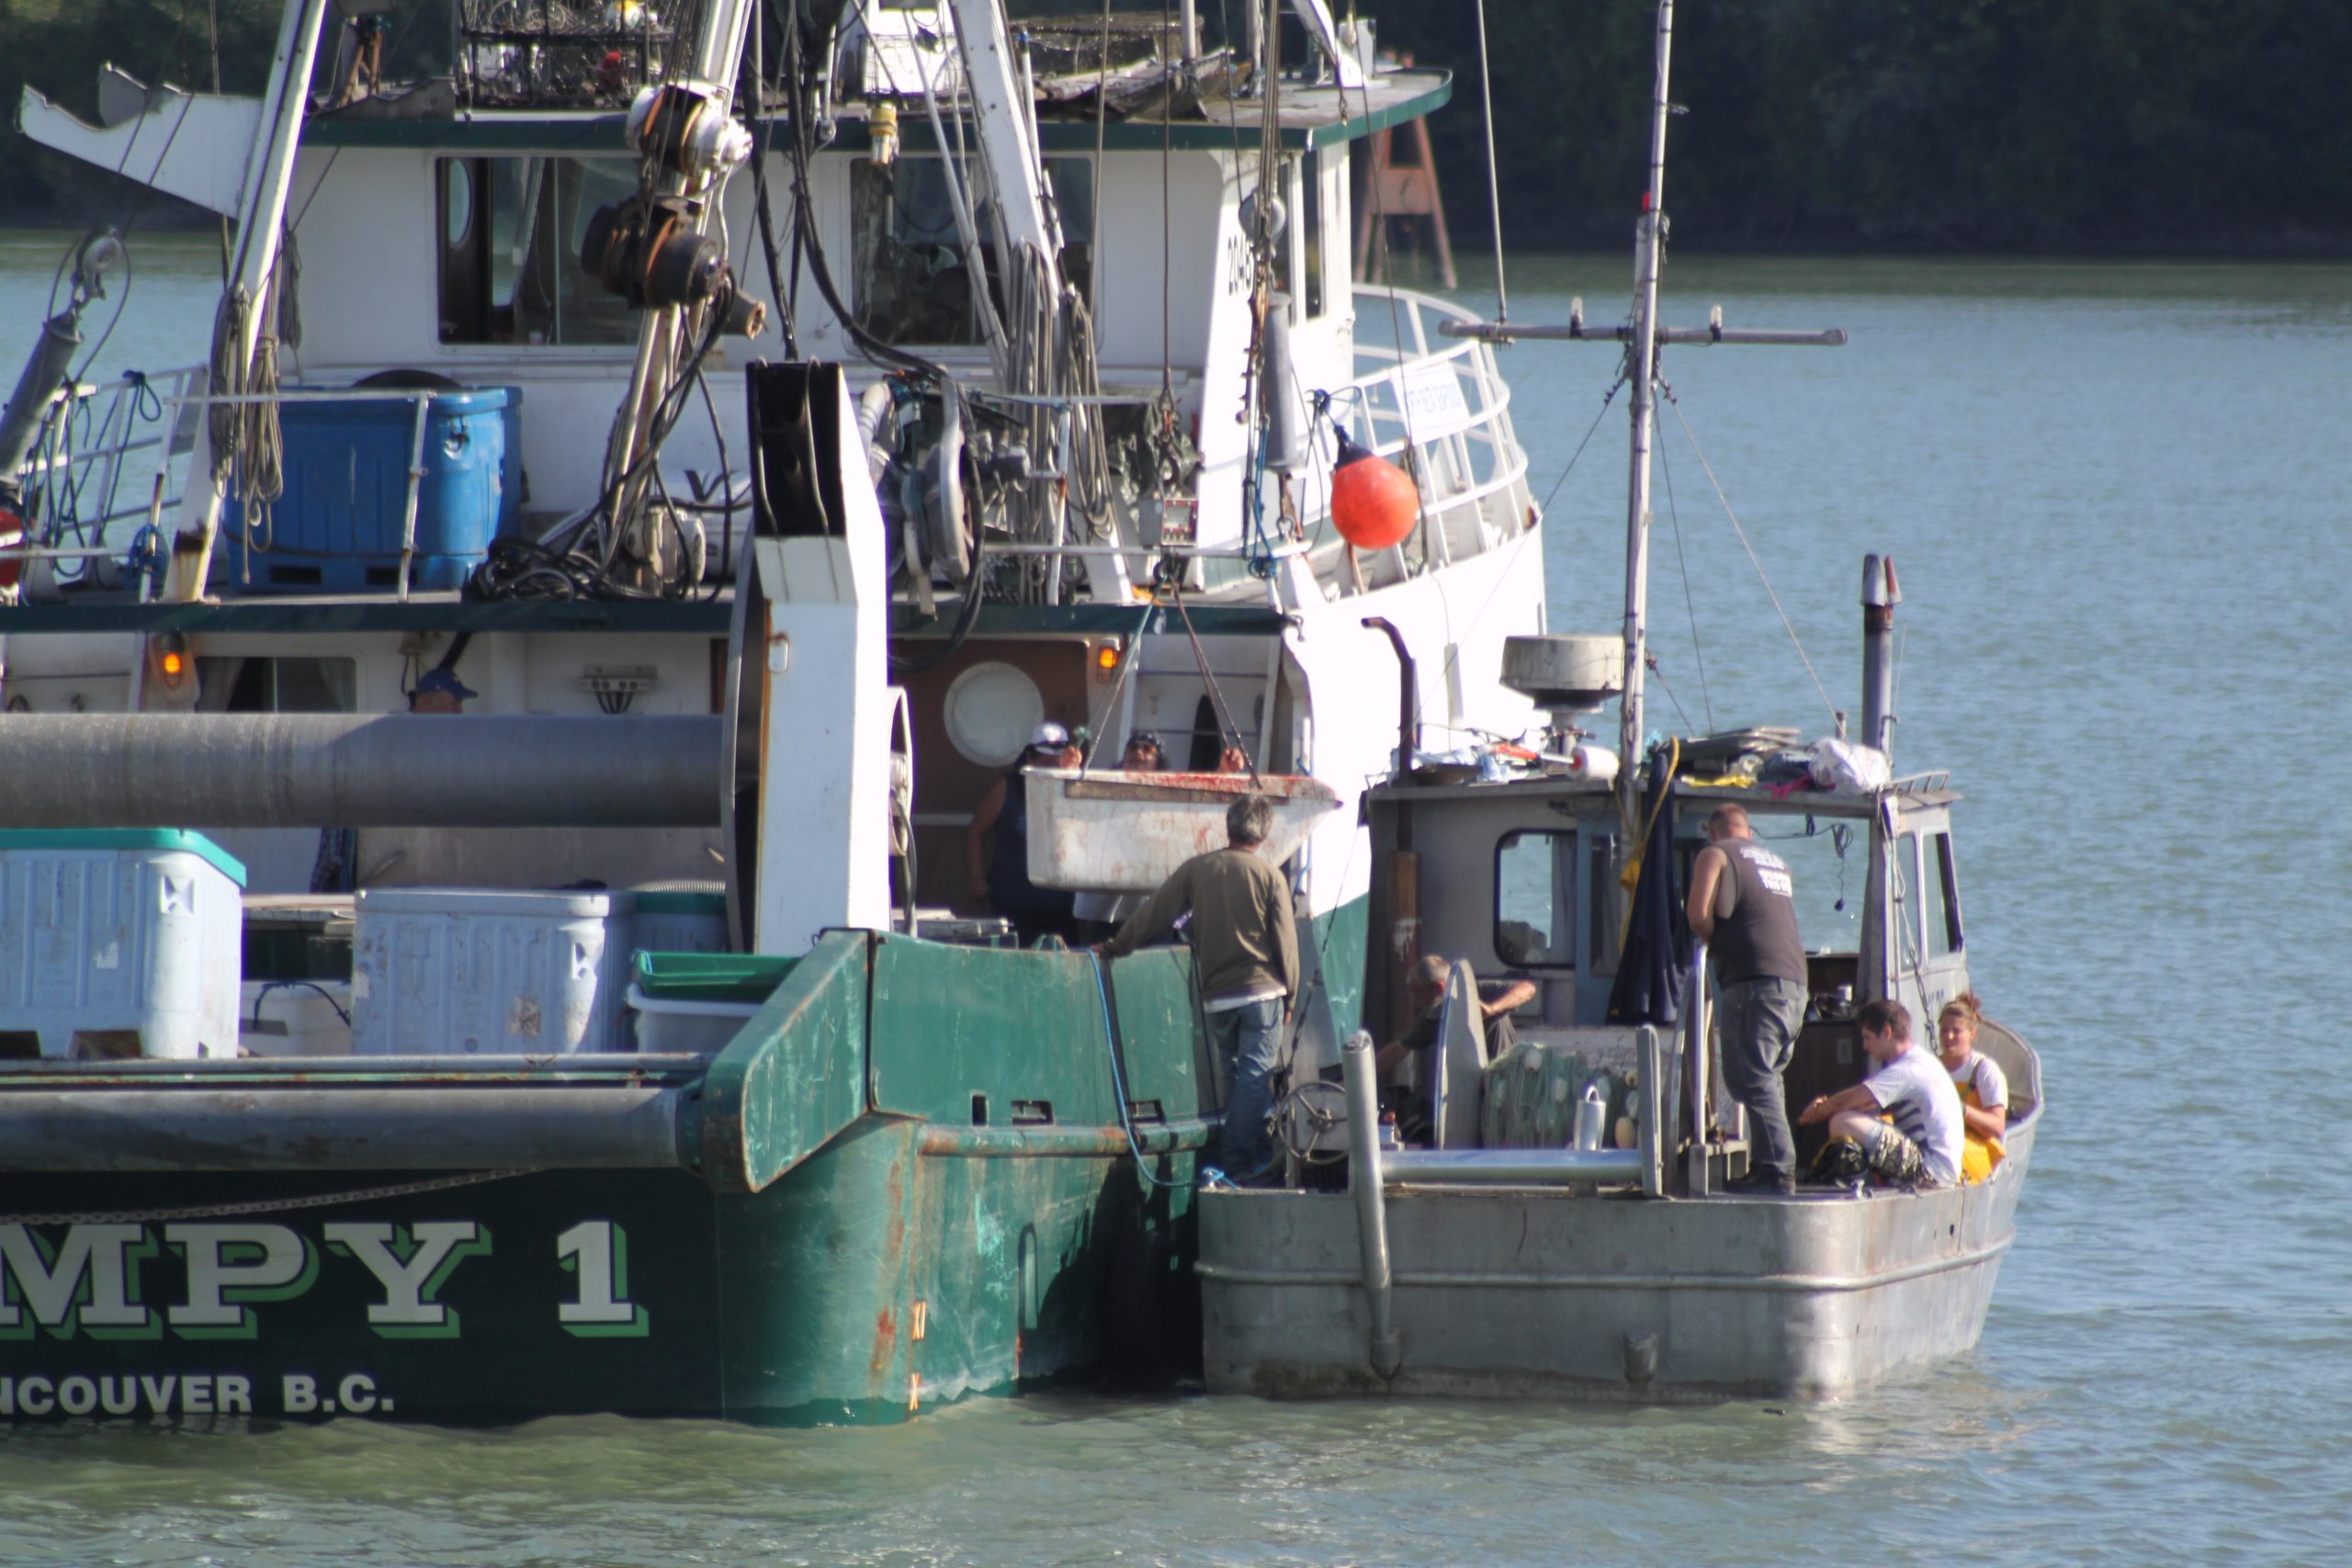 This photo shows a small fishing boat pulled up next to a larger one.